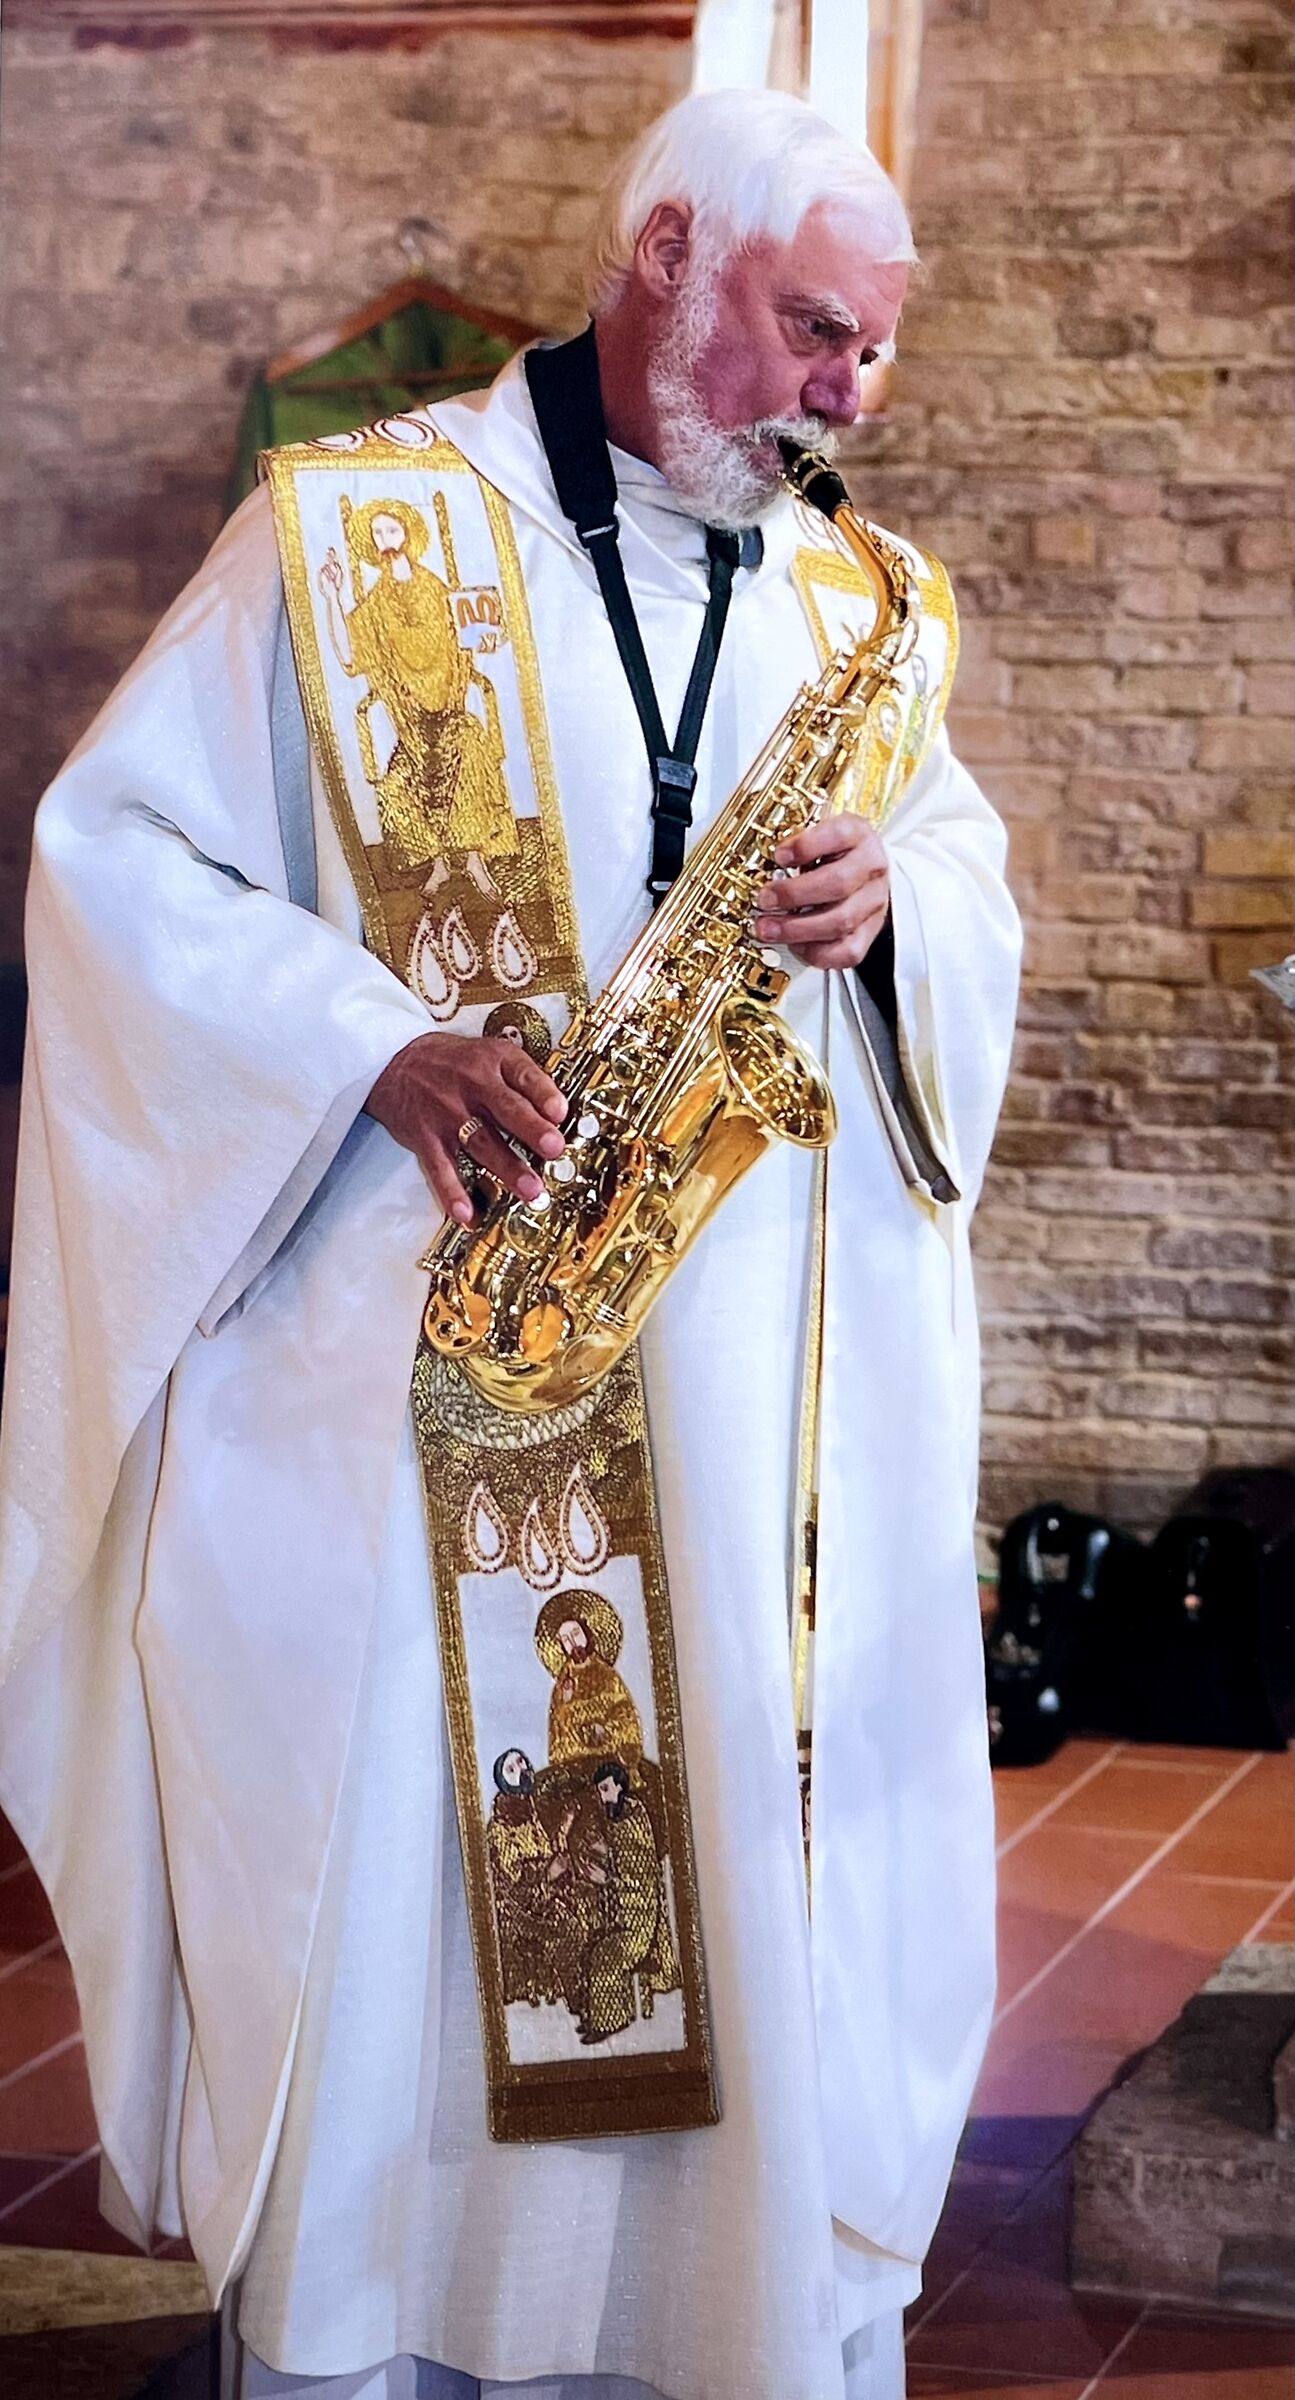 Instead of preaching, the priest plays the sax!...